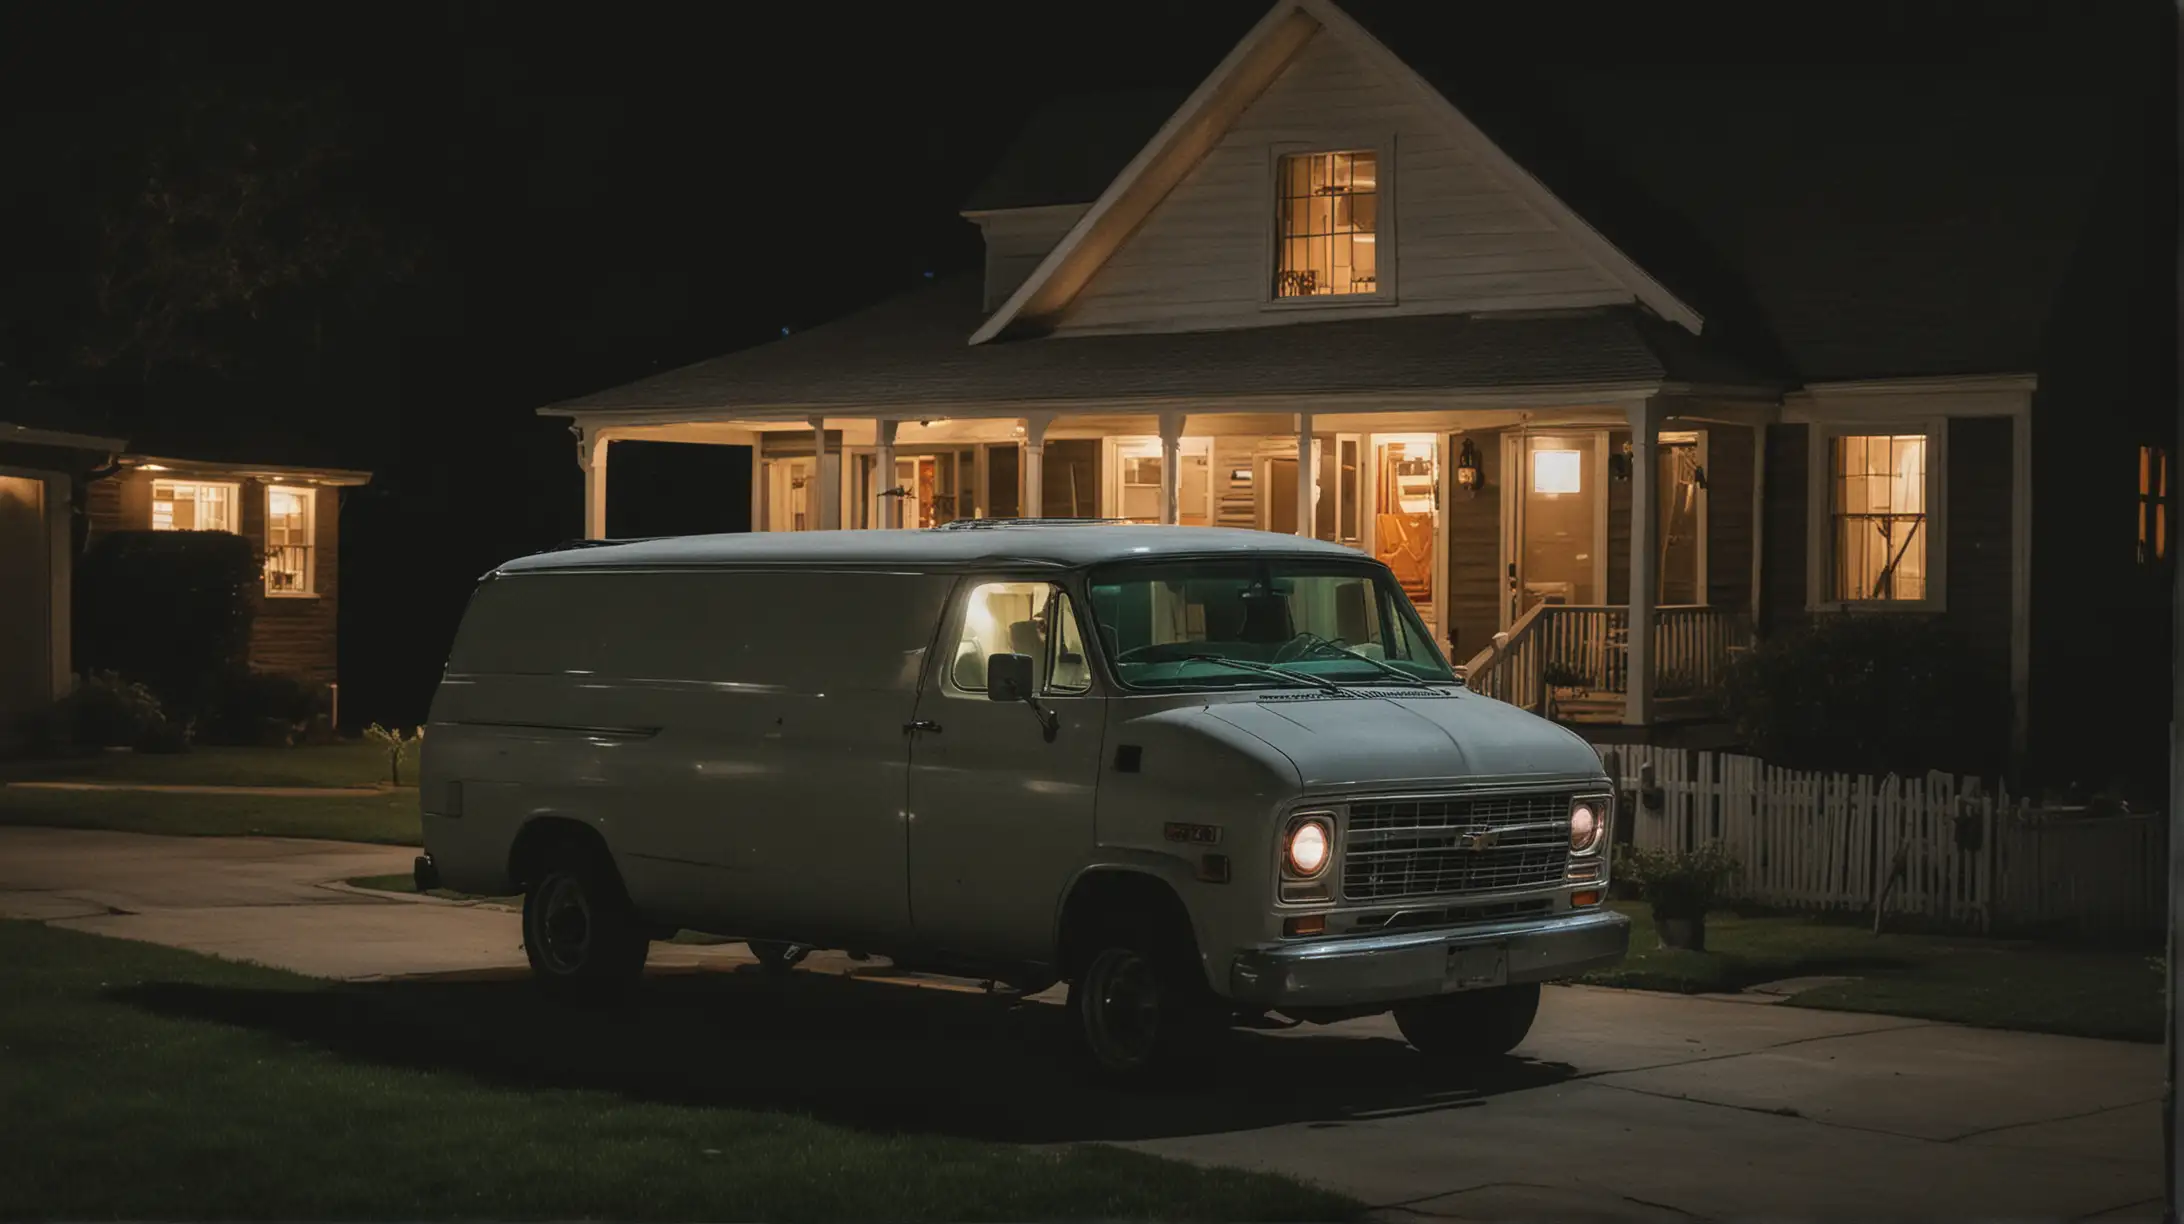 Vintage Chevy Van Parked at Night by House